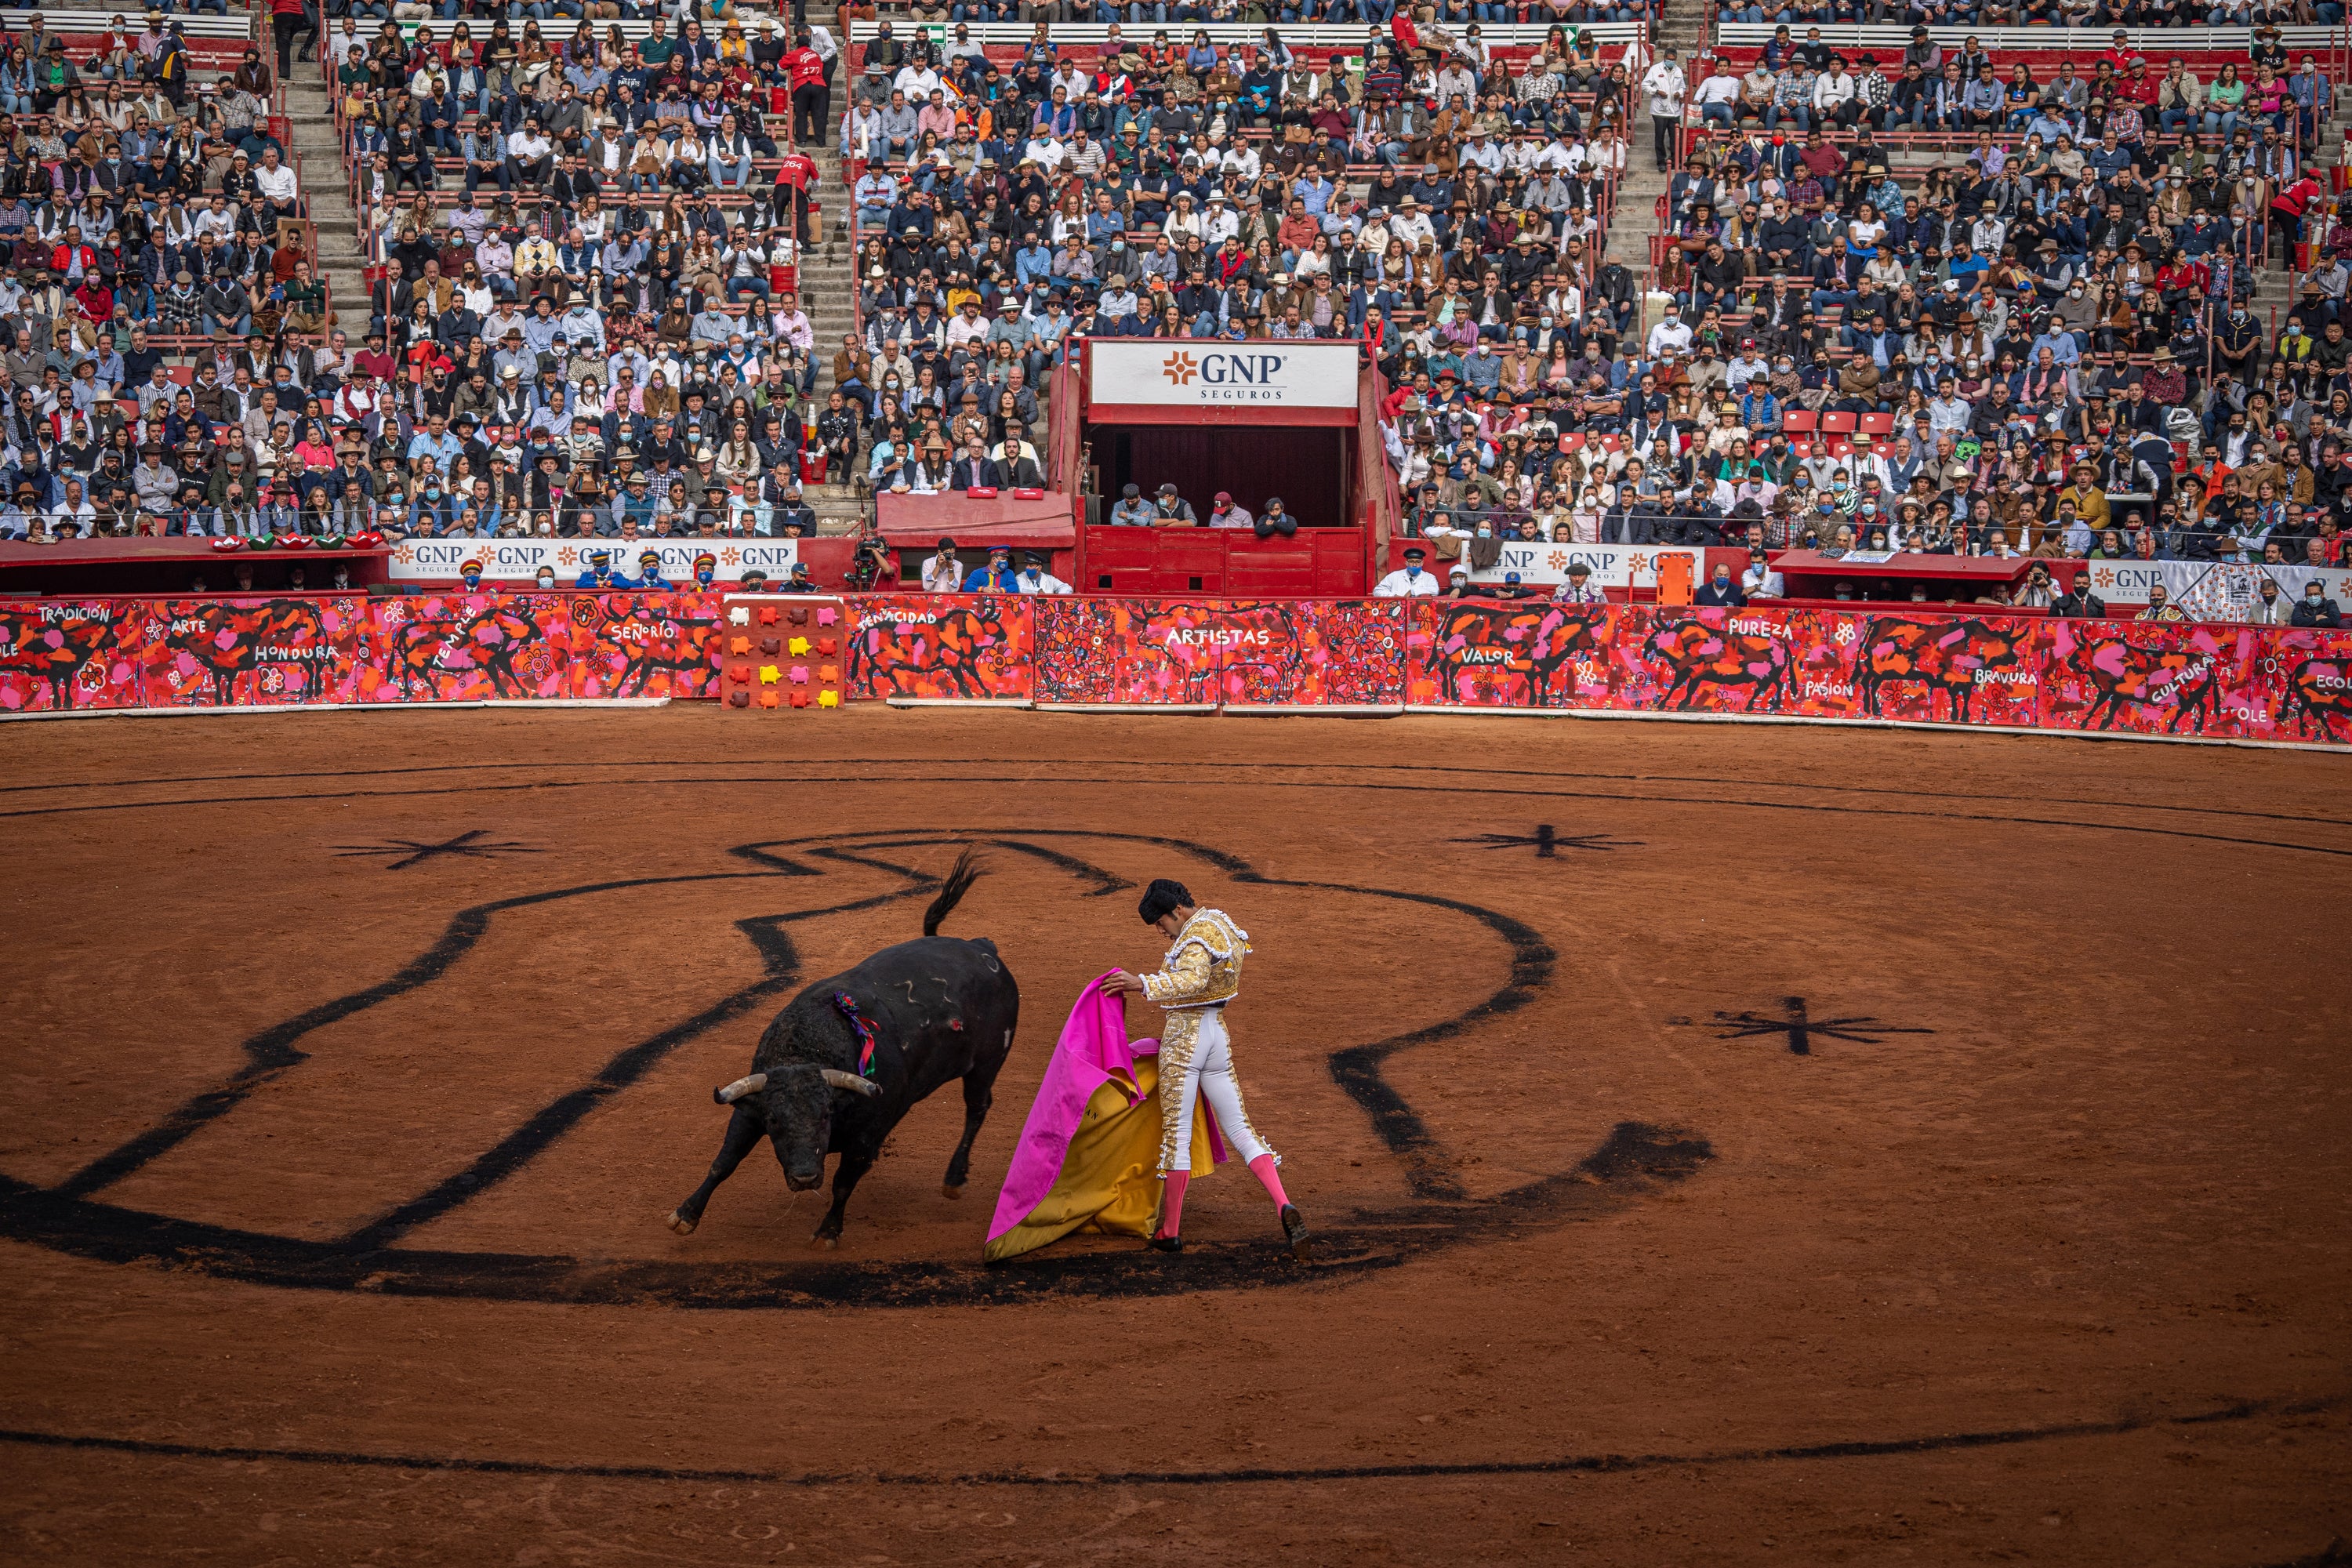 A bullfighter dodges a bull in the ring